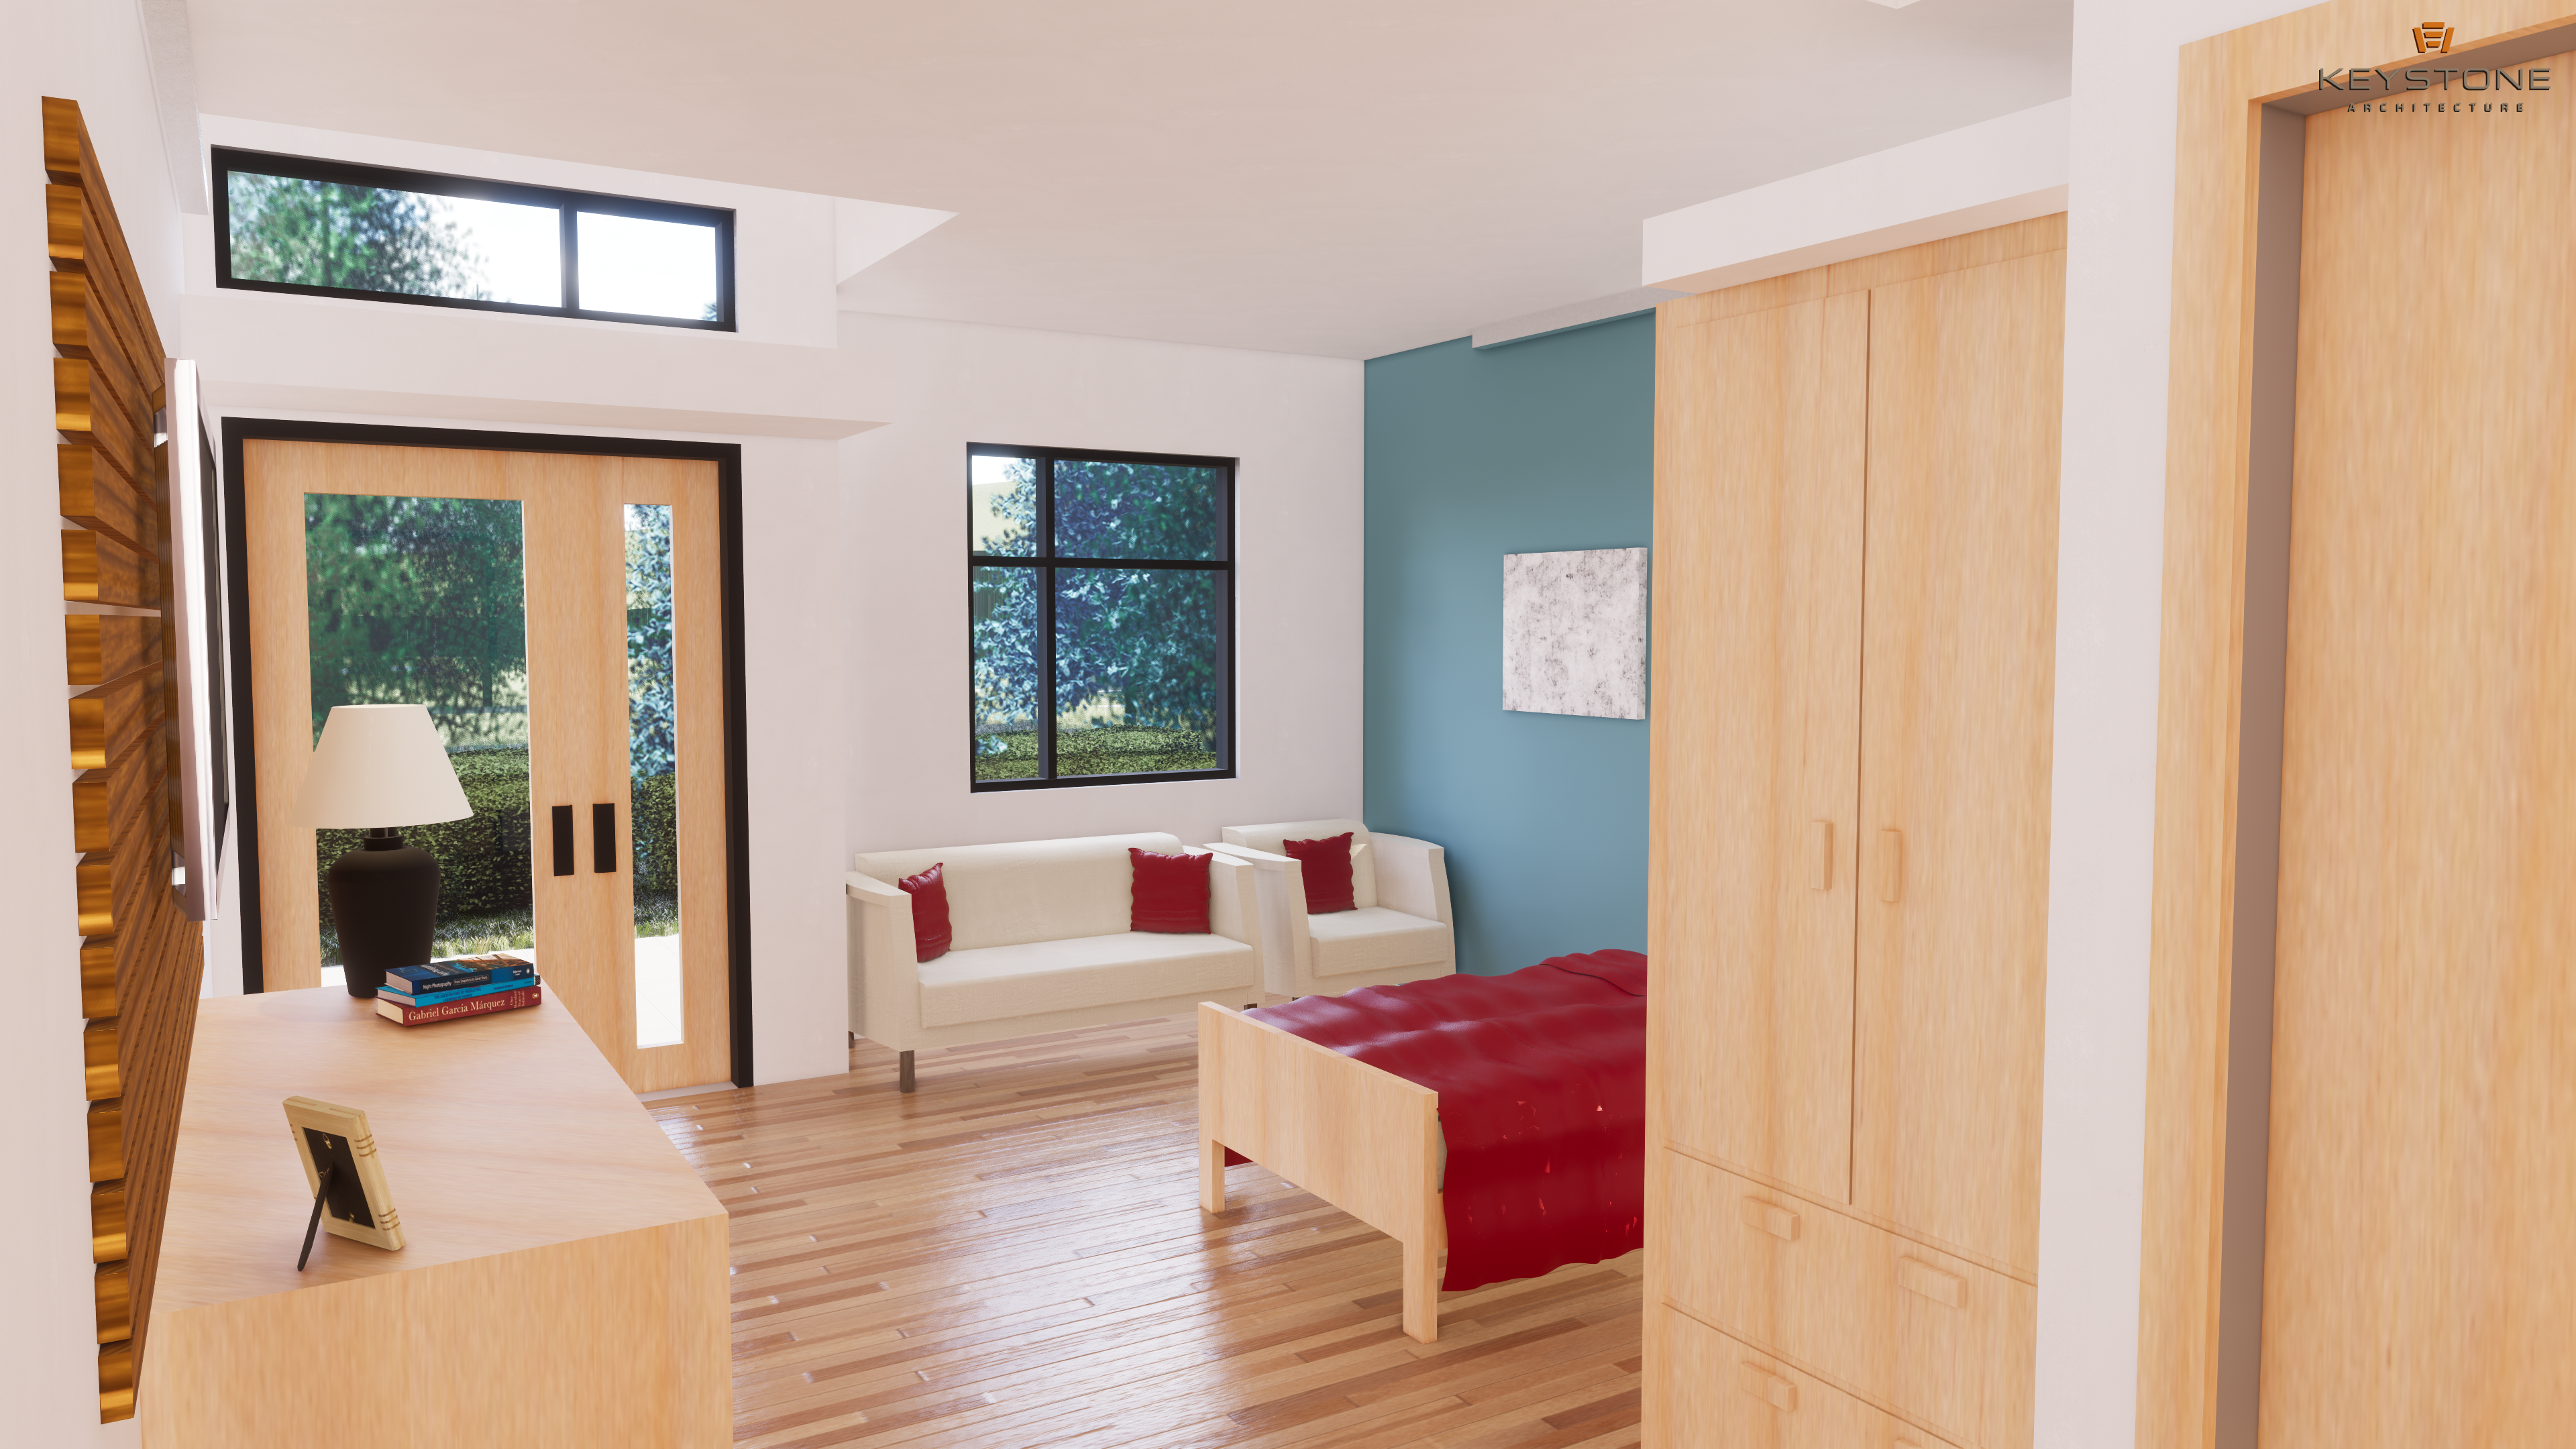 A rendering of a patient suite at Langley Hospice